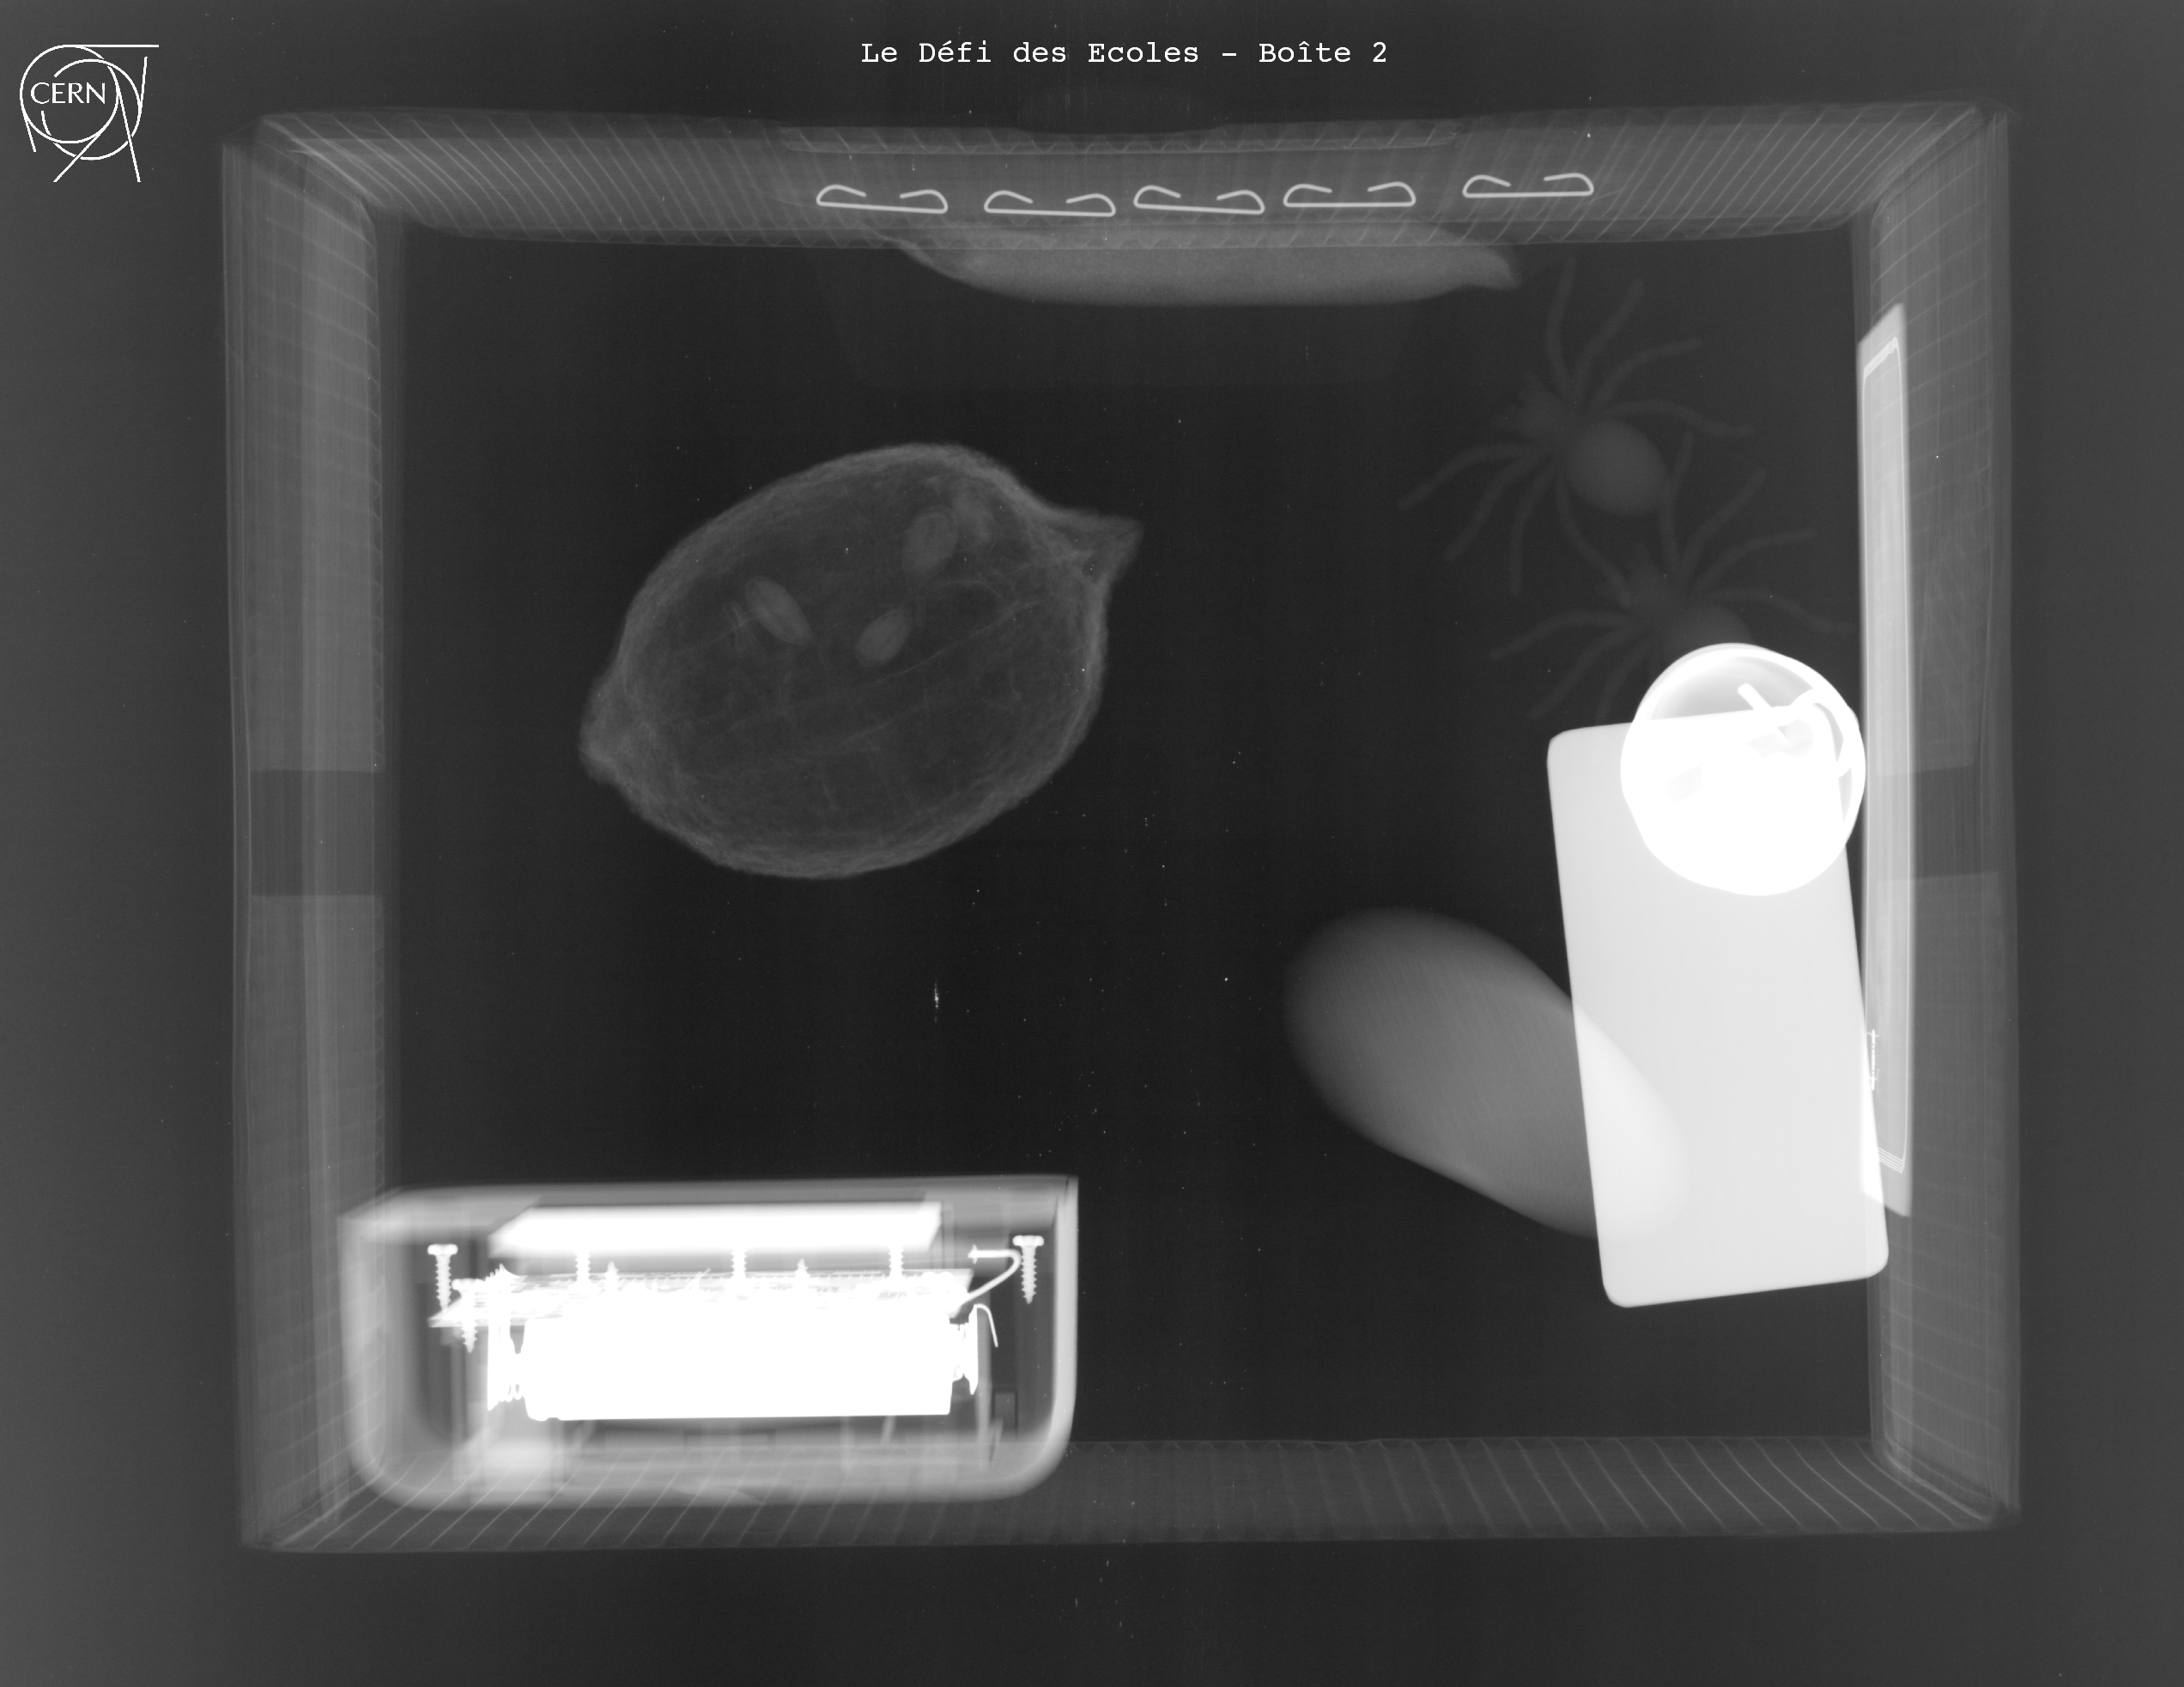 X-ray of the French box 